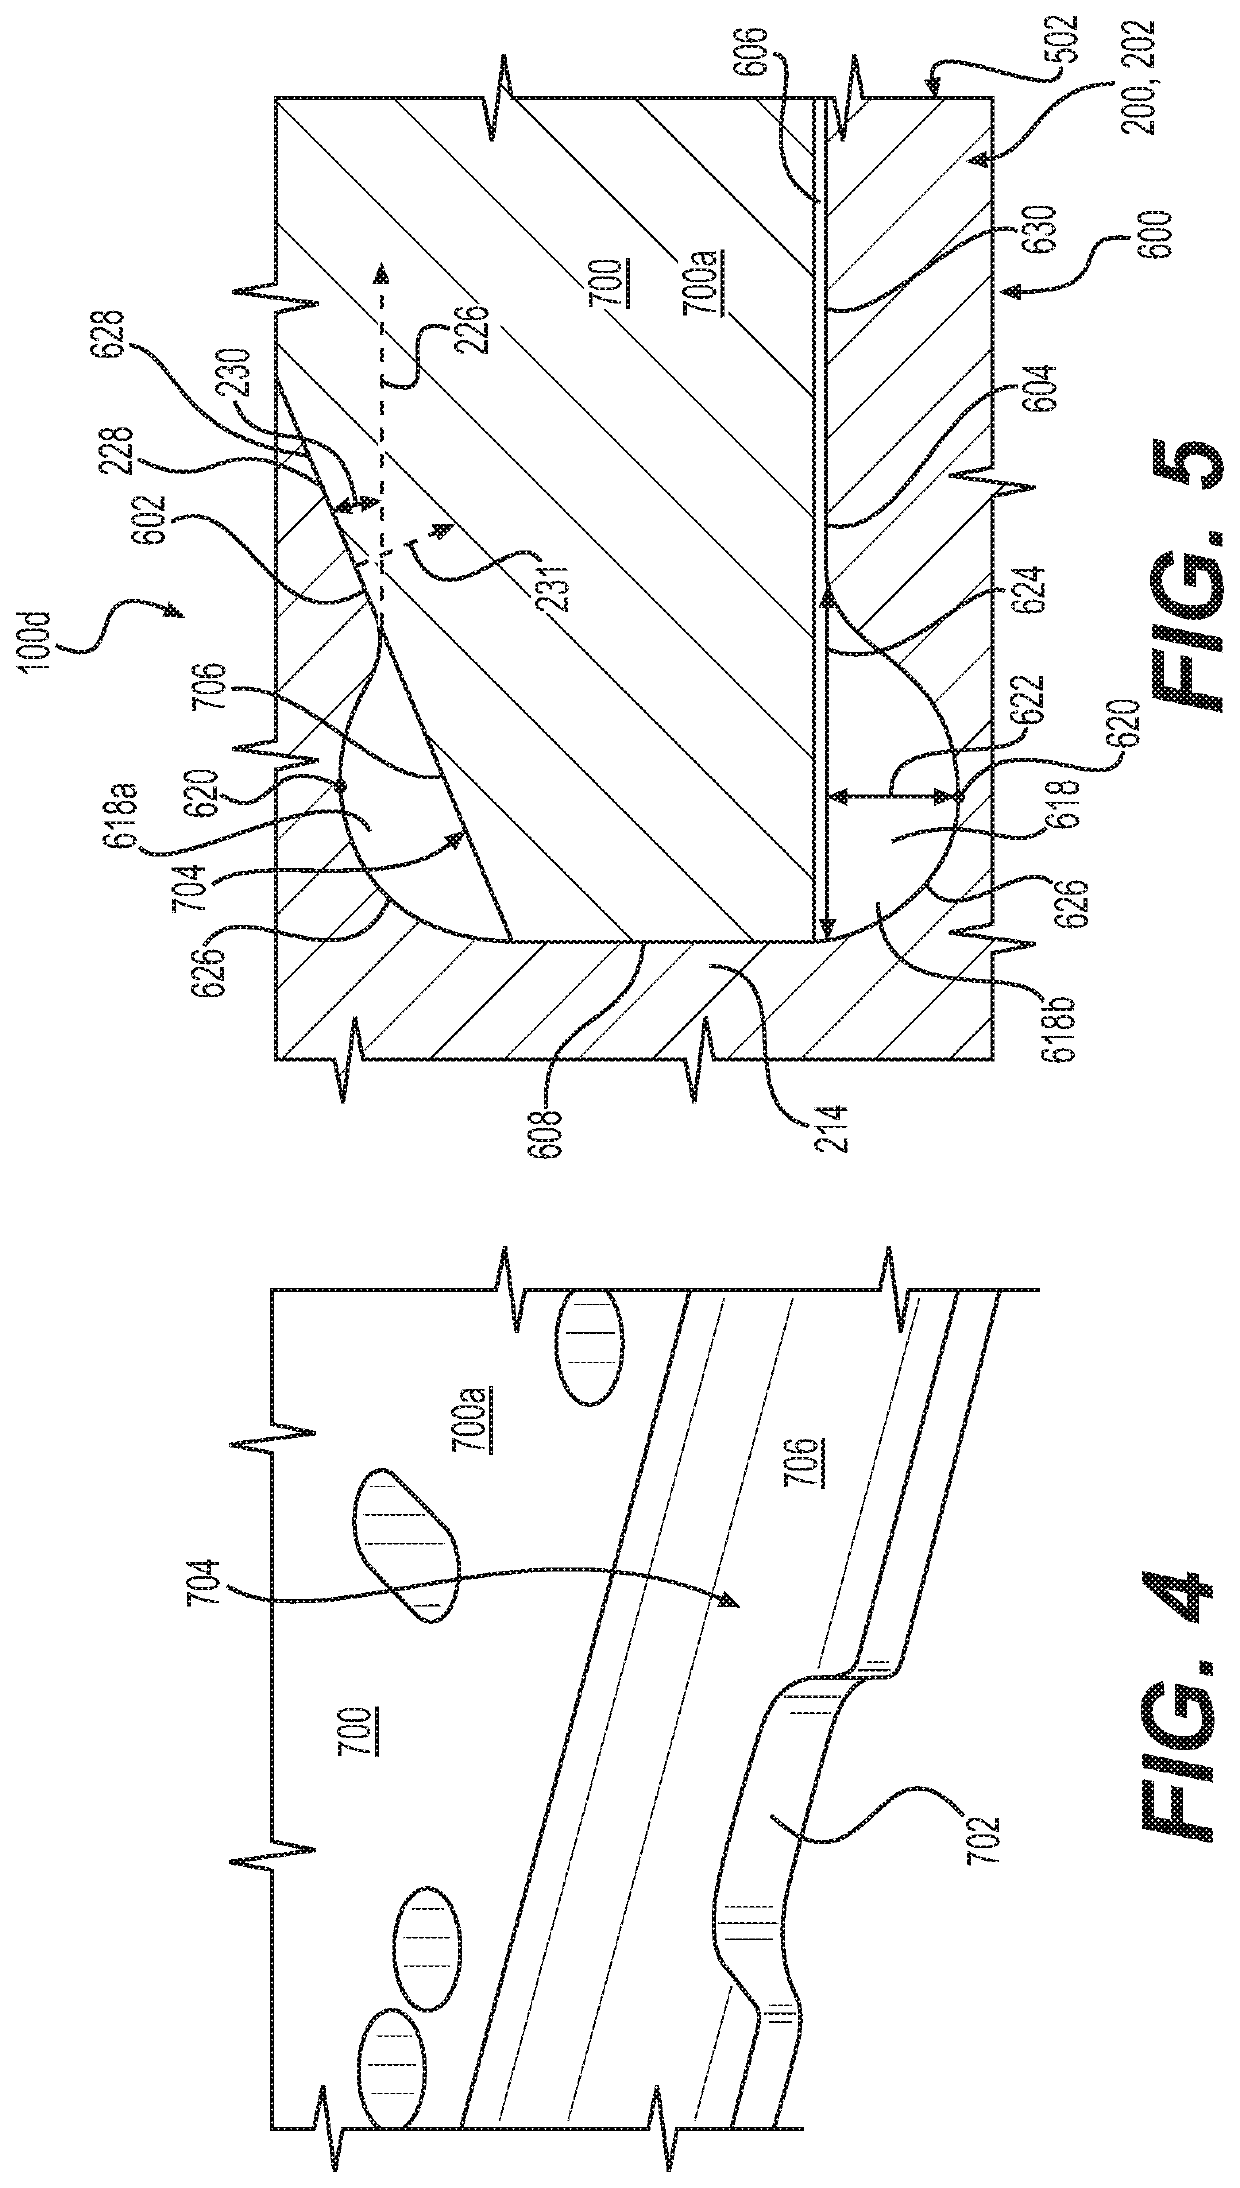 Work implement assembly using an adapter mating with a notched base edge